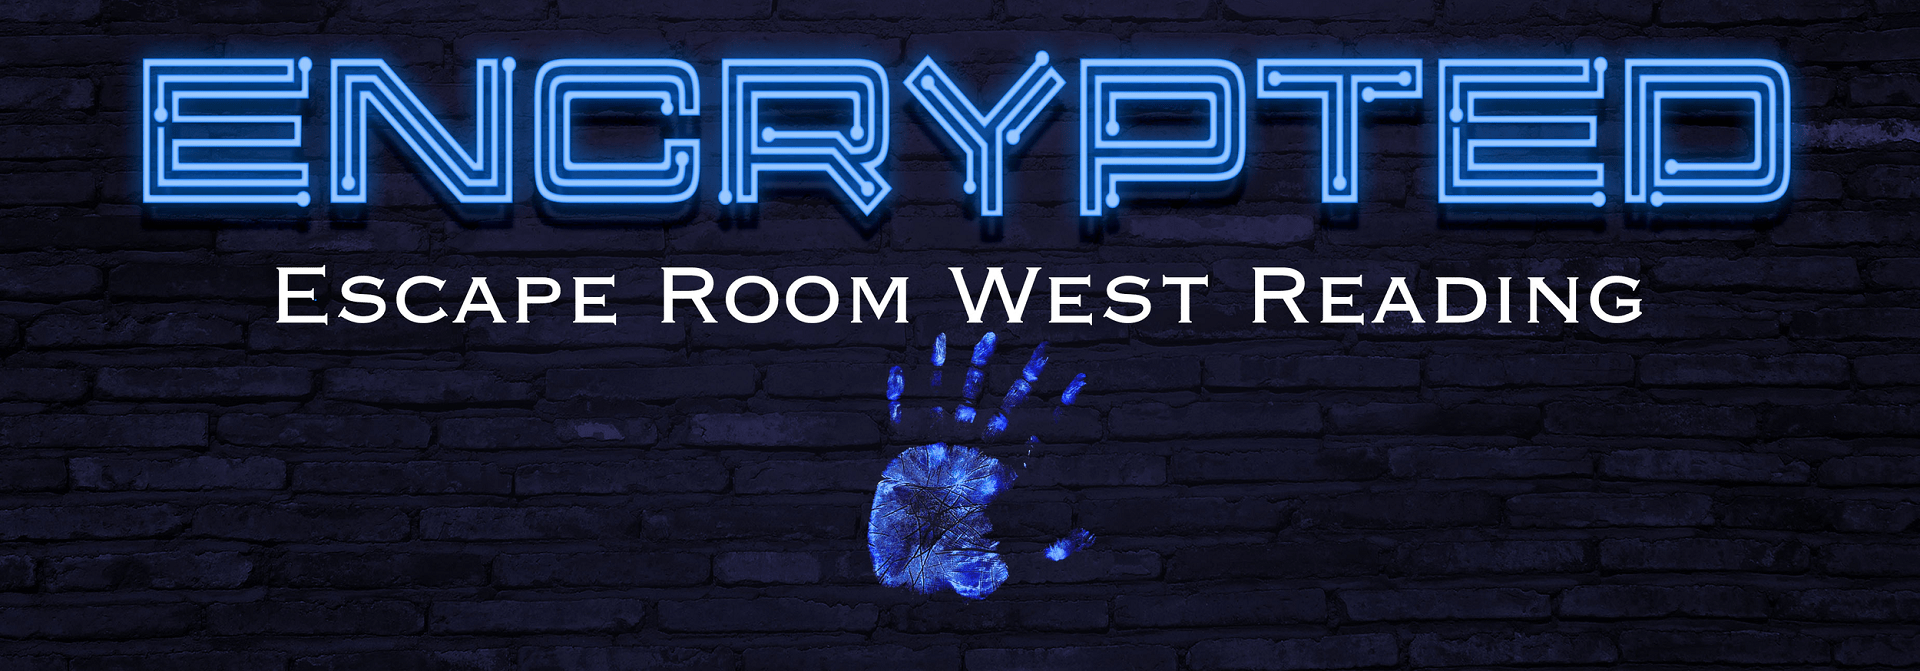 Encryption Escape Rooms in UK